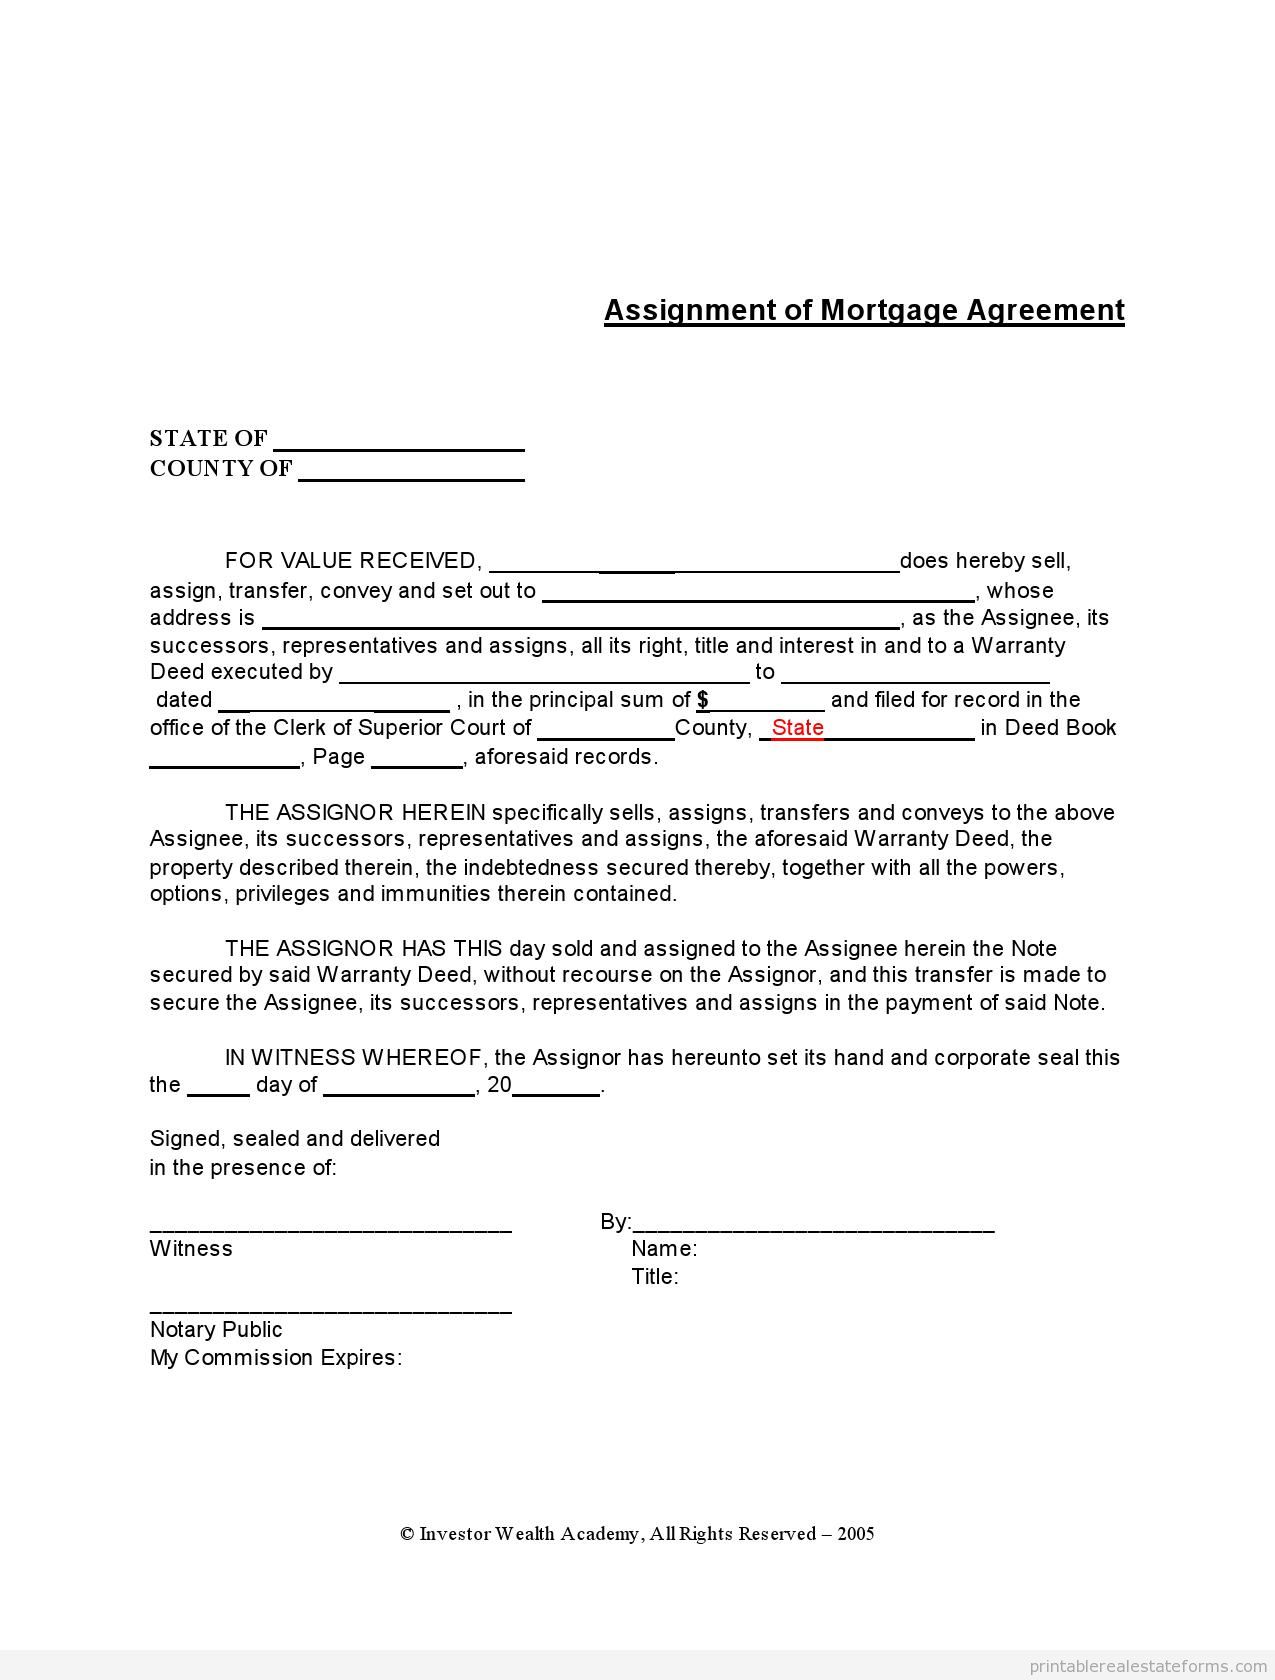 assignment of mortgage document